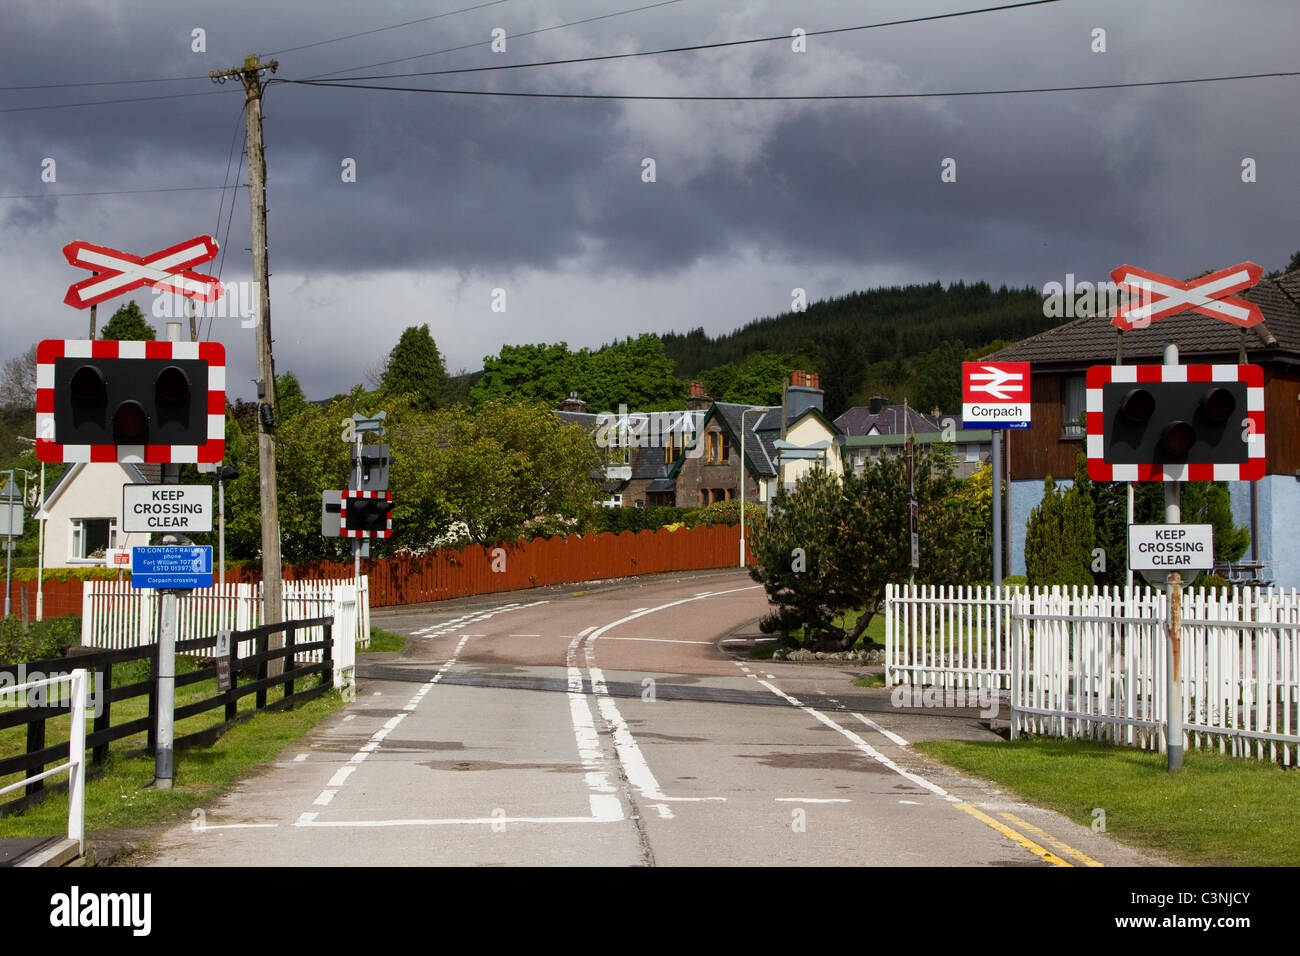 corpach highlands railway station level crossing warning signs scotland uk Stock Photo